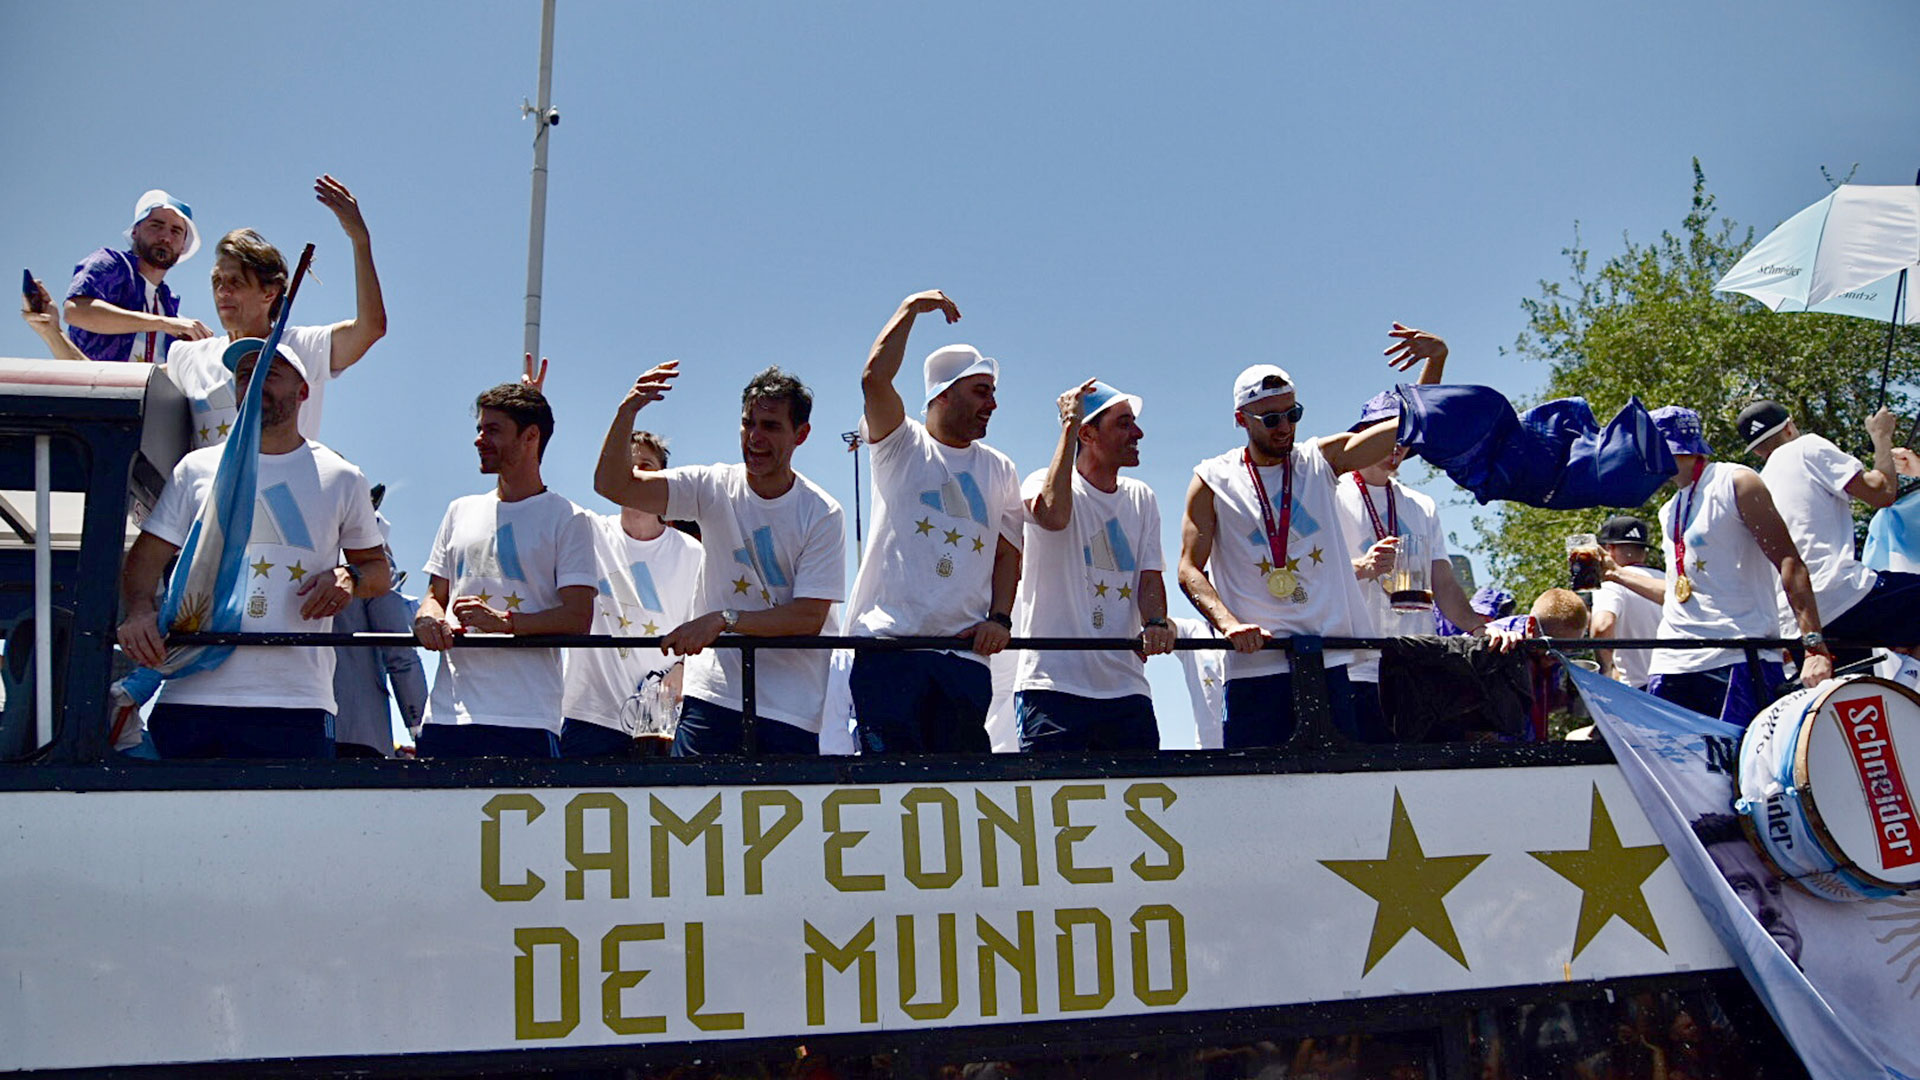 The National Soccer Team during the World Cup celebration caravan (Ariel Torres)